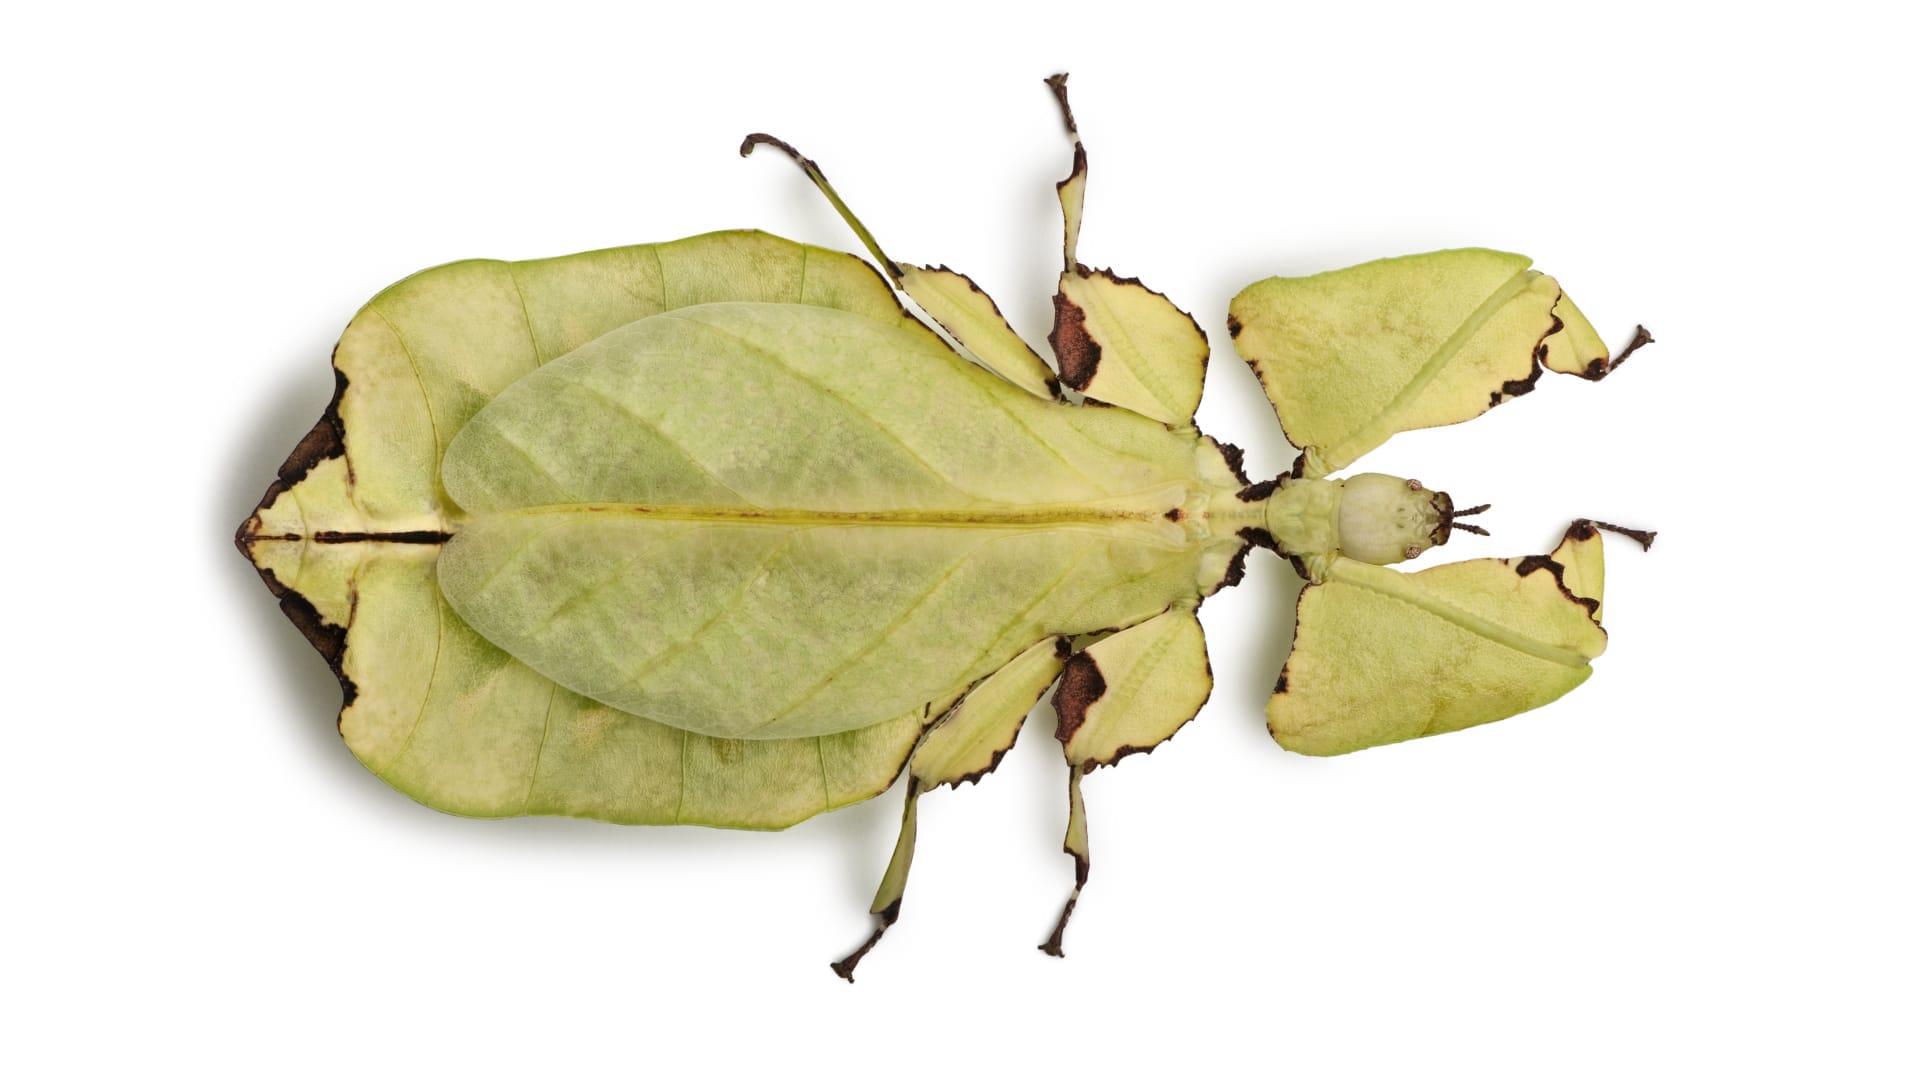 Leaf insect pictures